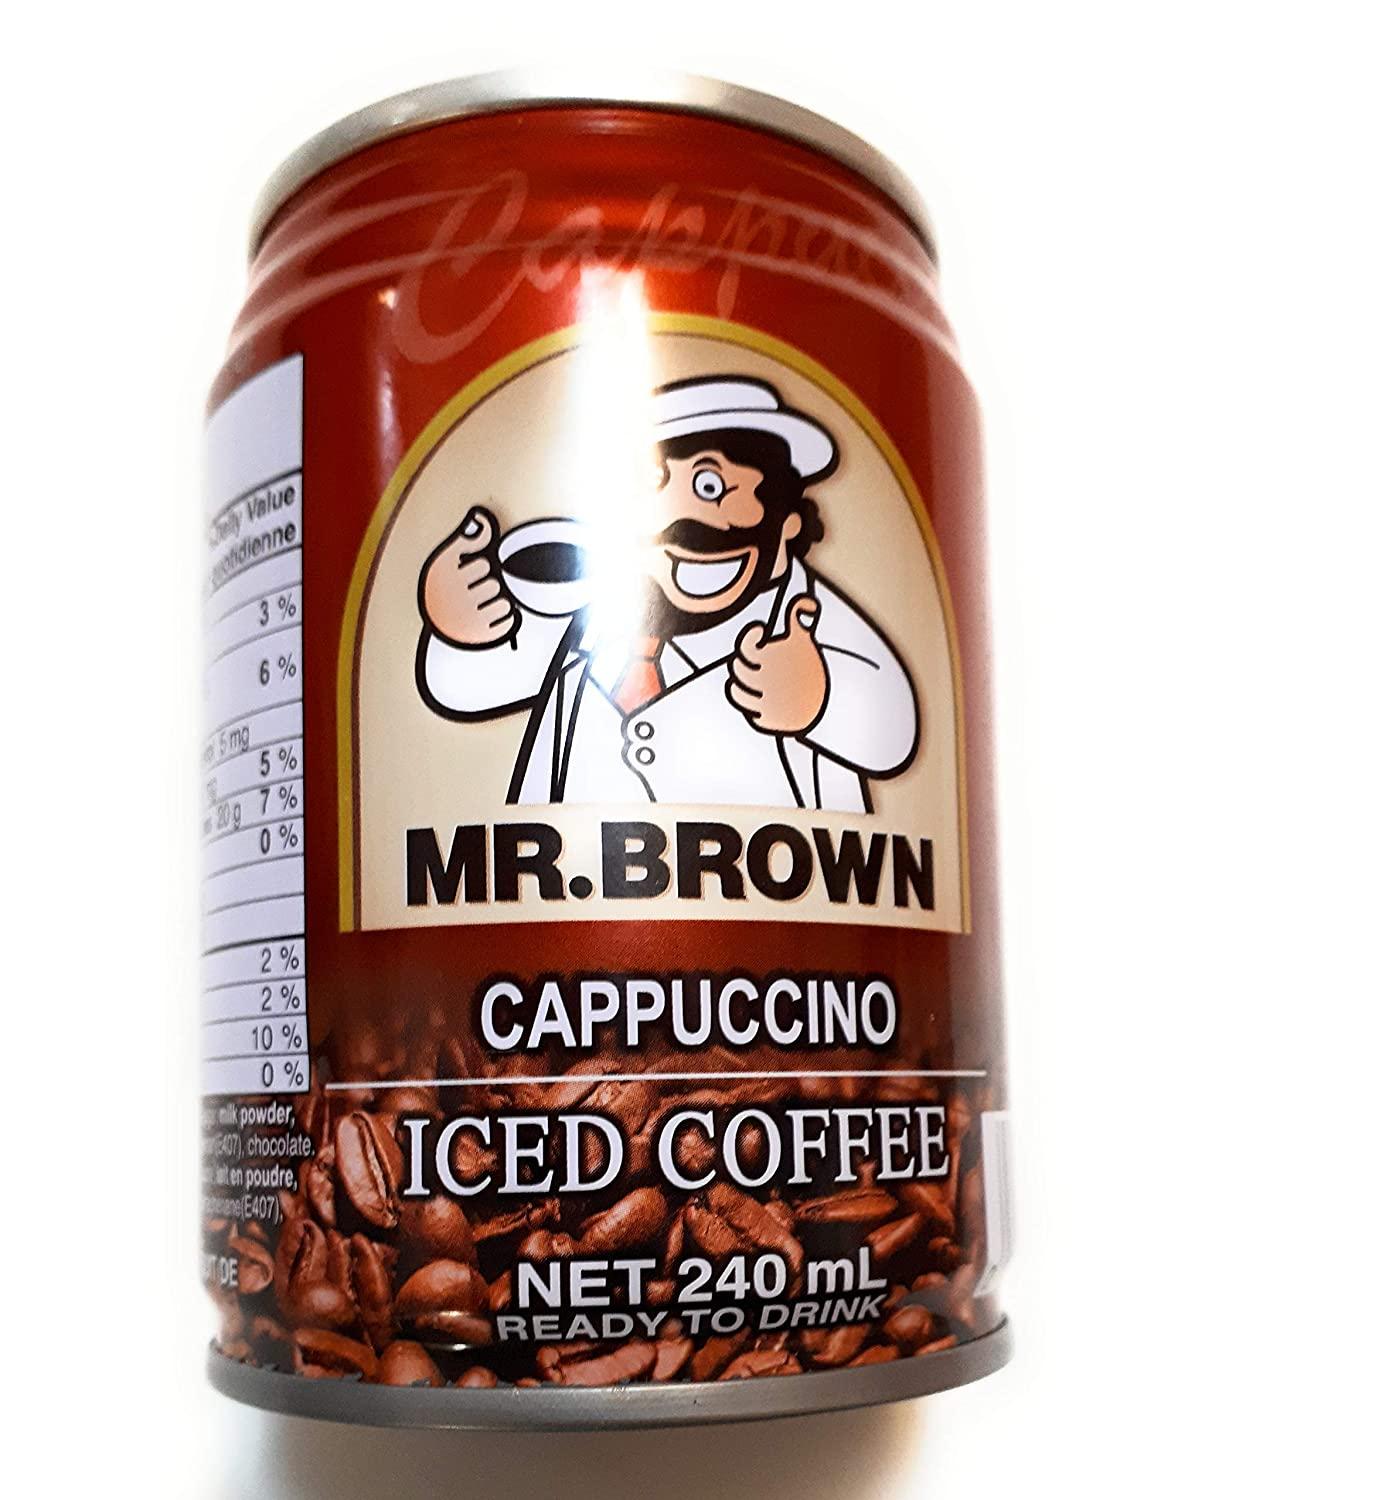 mrbrown-cappuccino